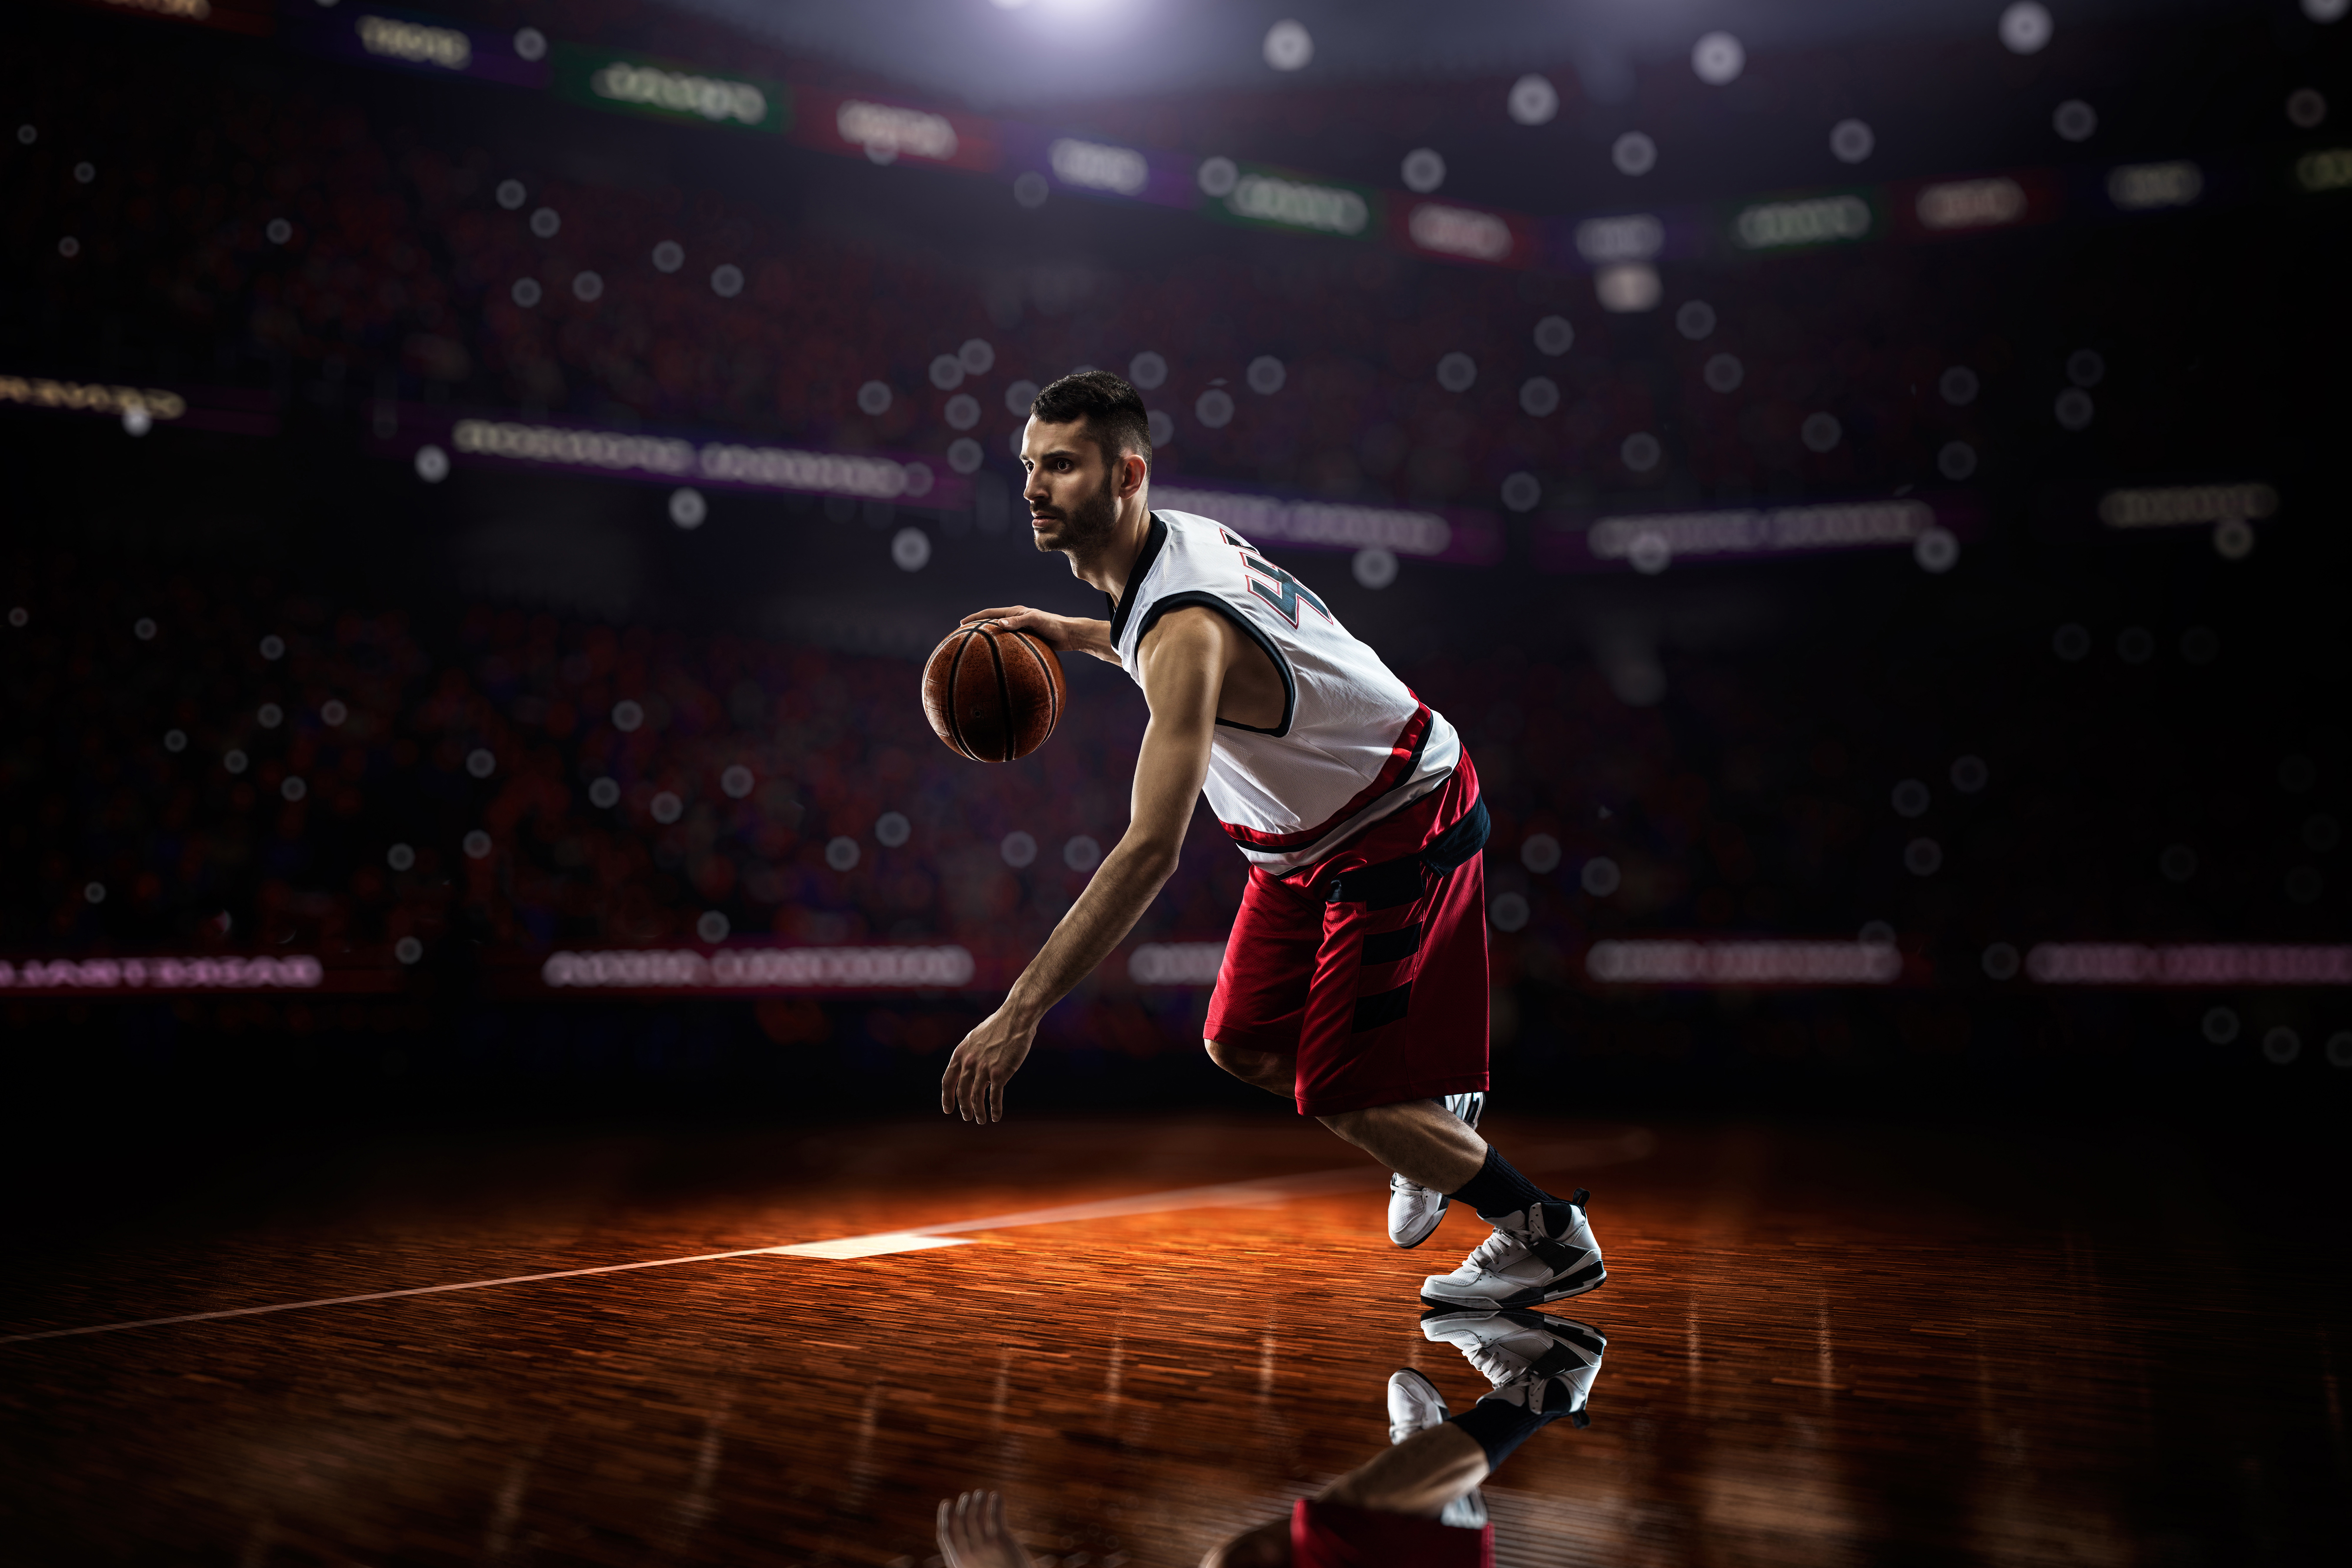 sports wallpapers hd,basketball player,basketball,basketball moves,sport venue,player